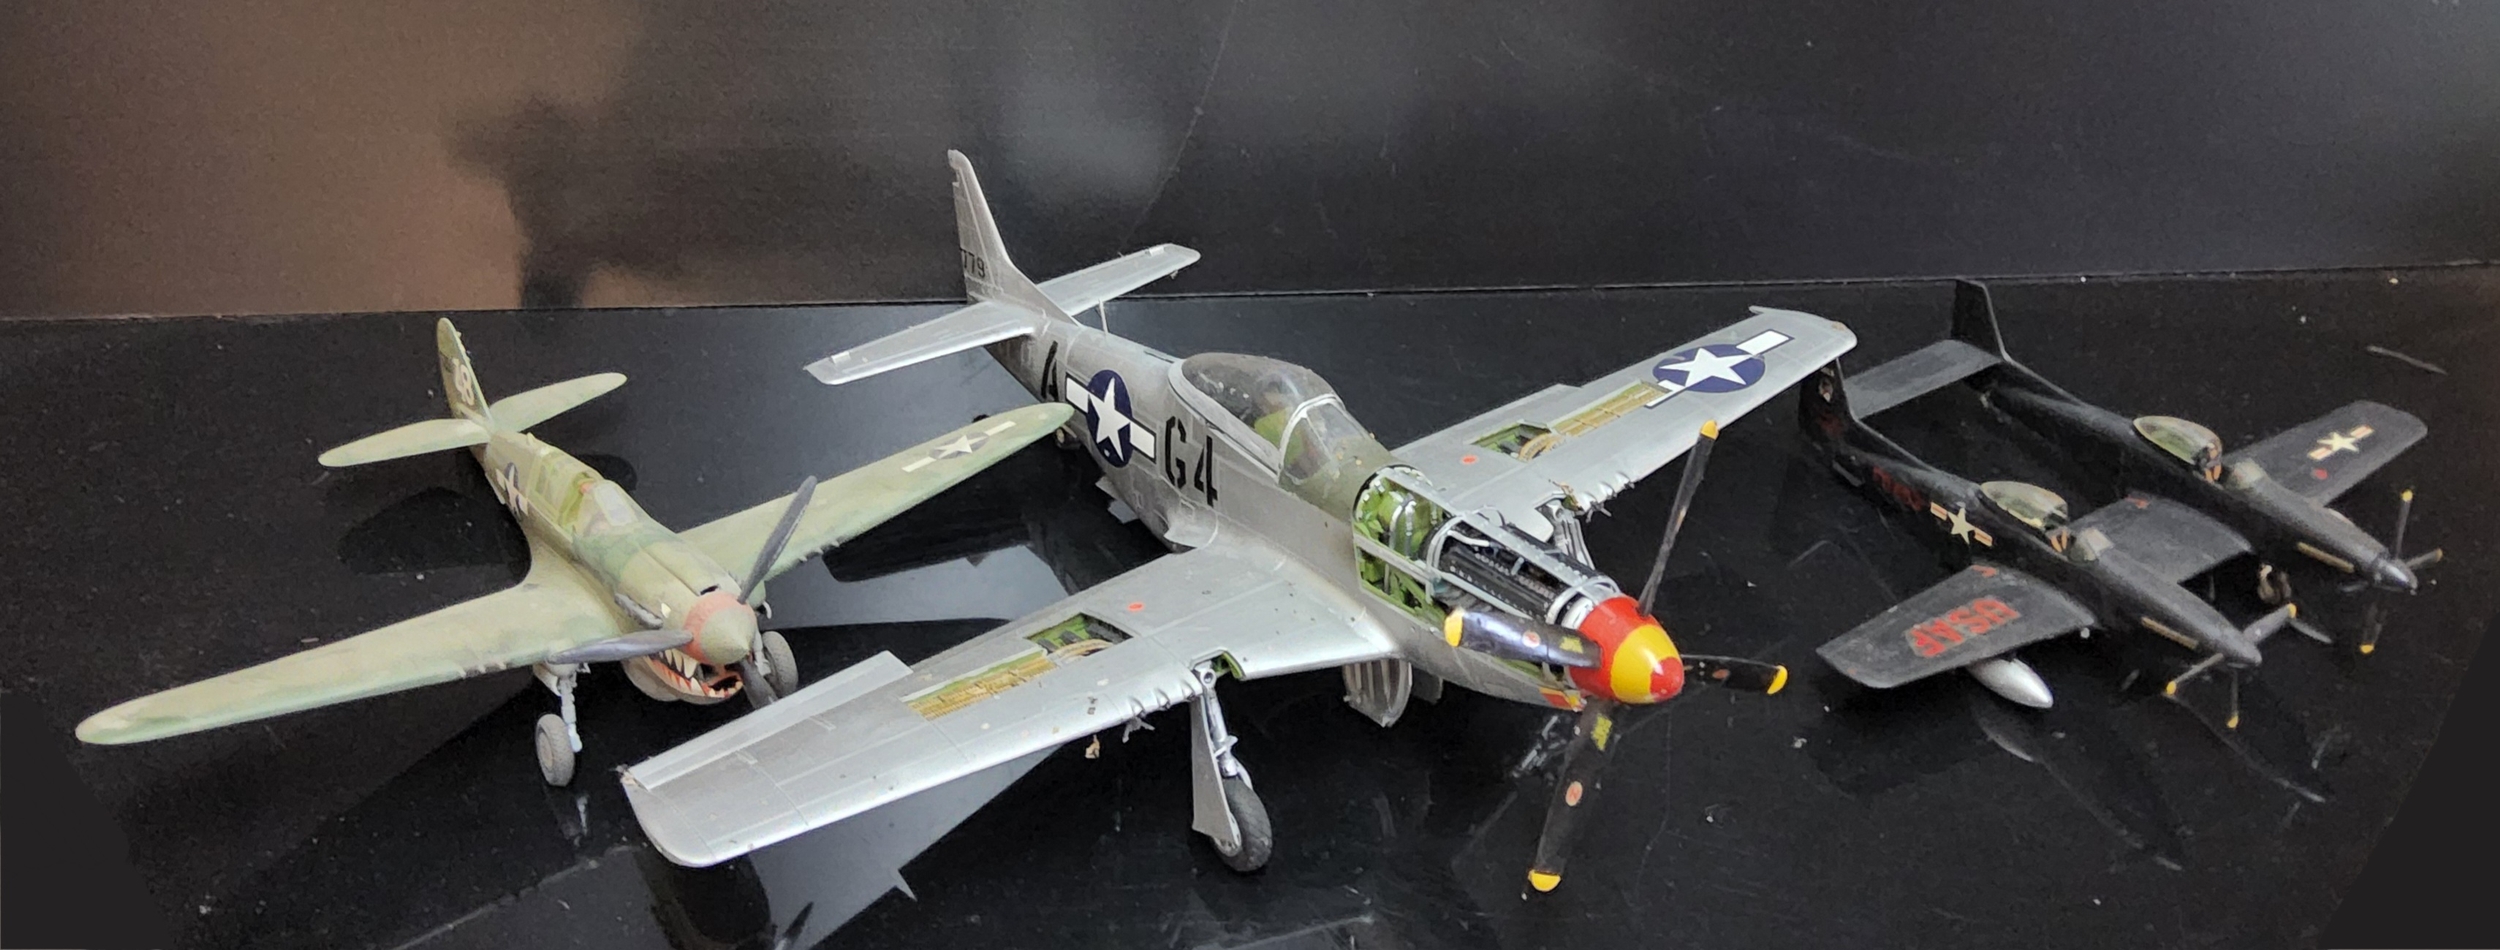 A Quantity of Kit Built American Airforce / Navy Model Aircraft, Mustang P-51d, P40E, F-82E Twin